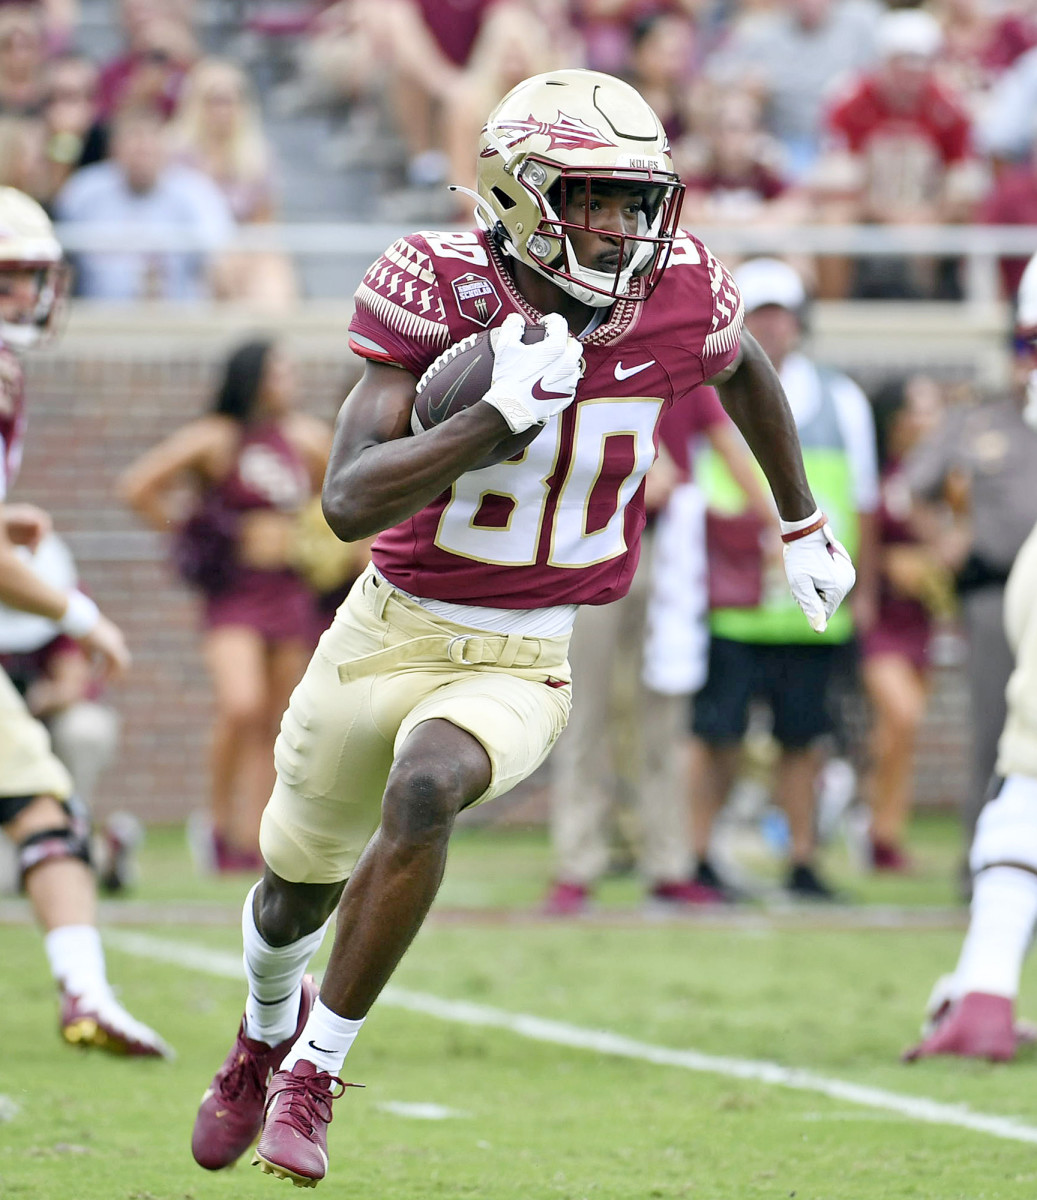 Florida State Wide Receiver Ontaria Wilson